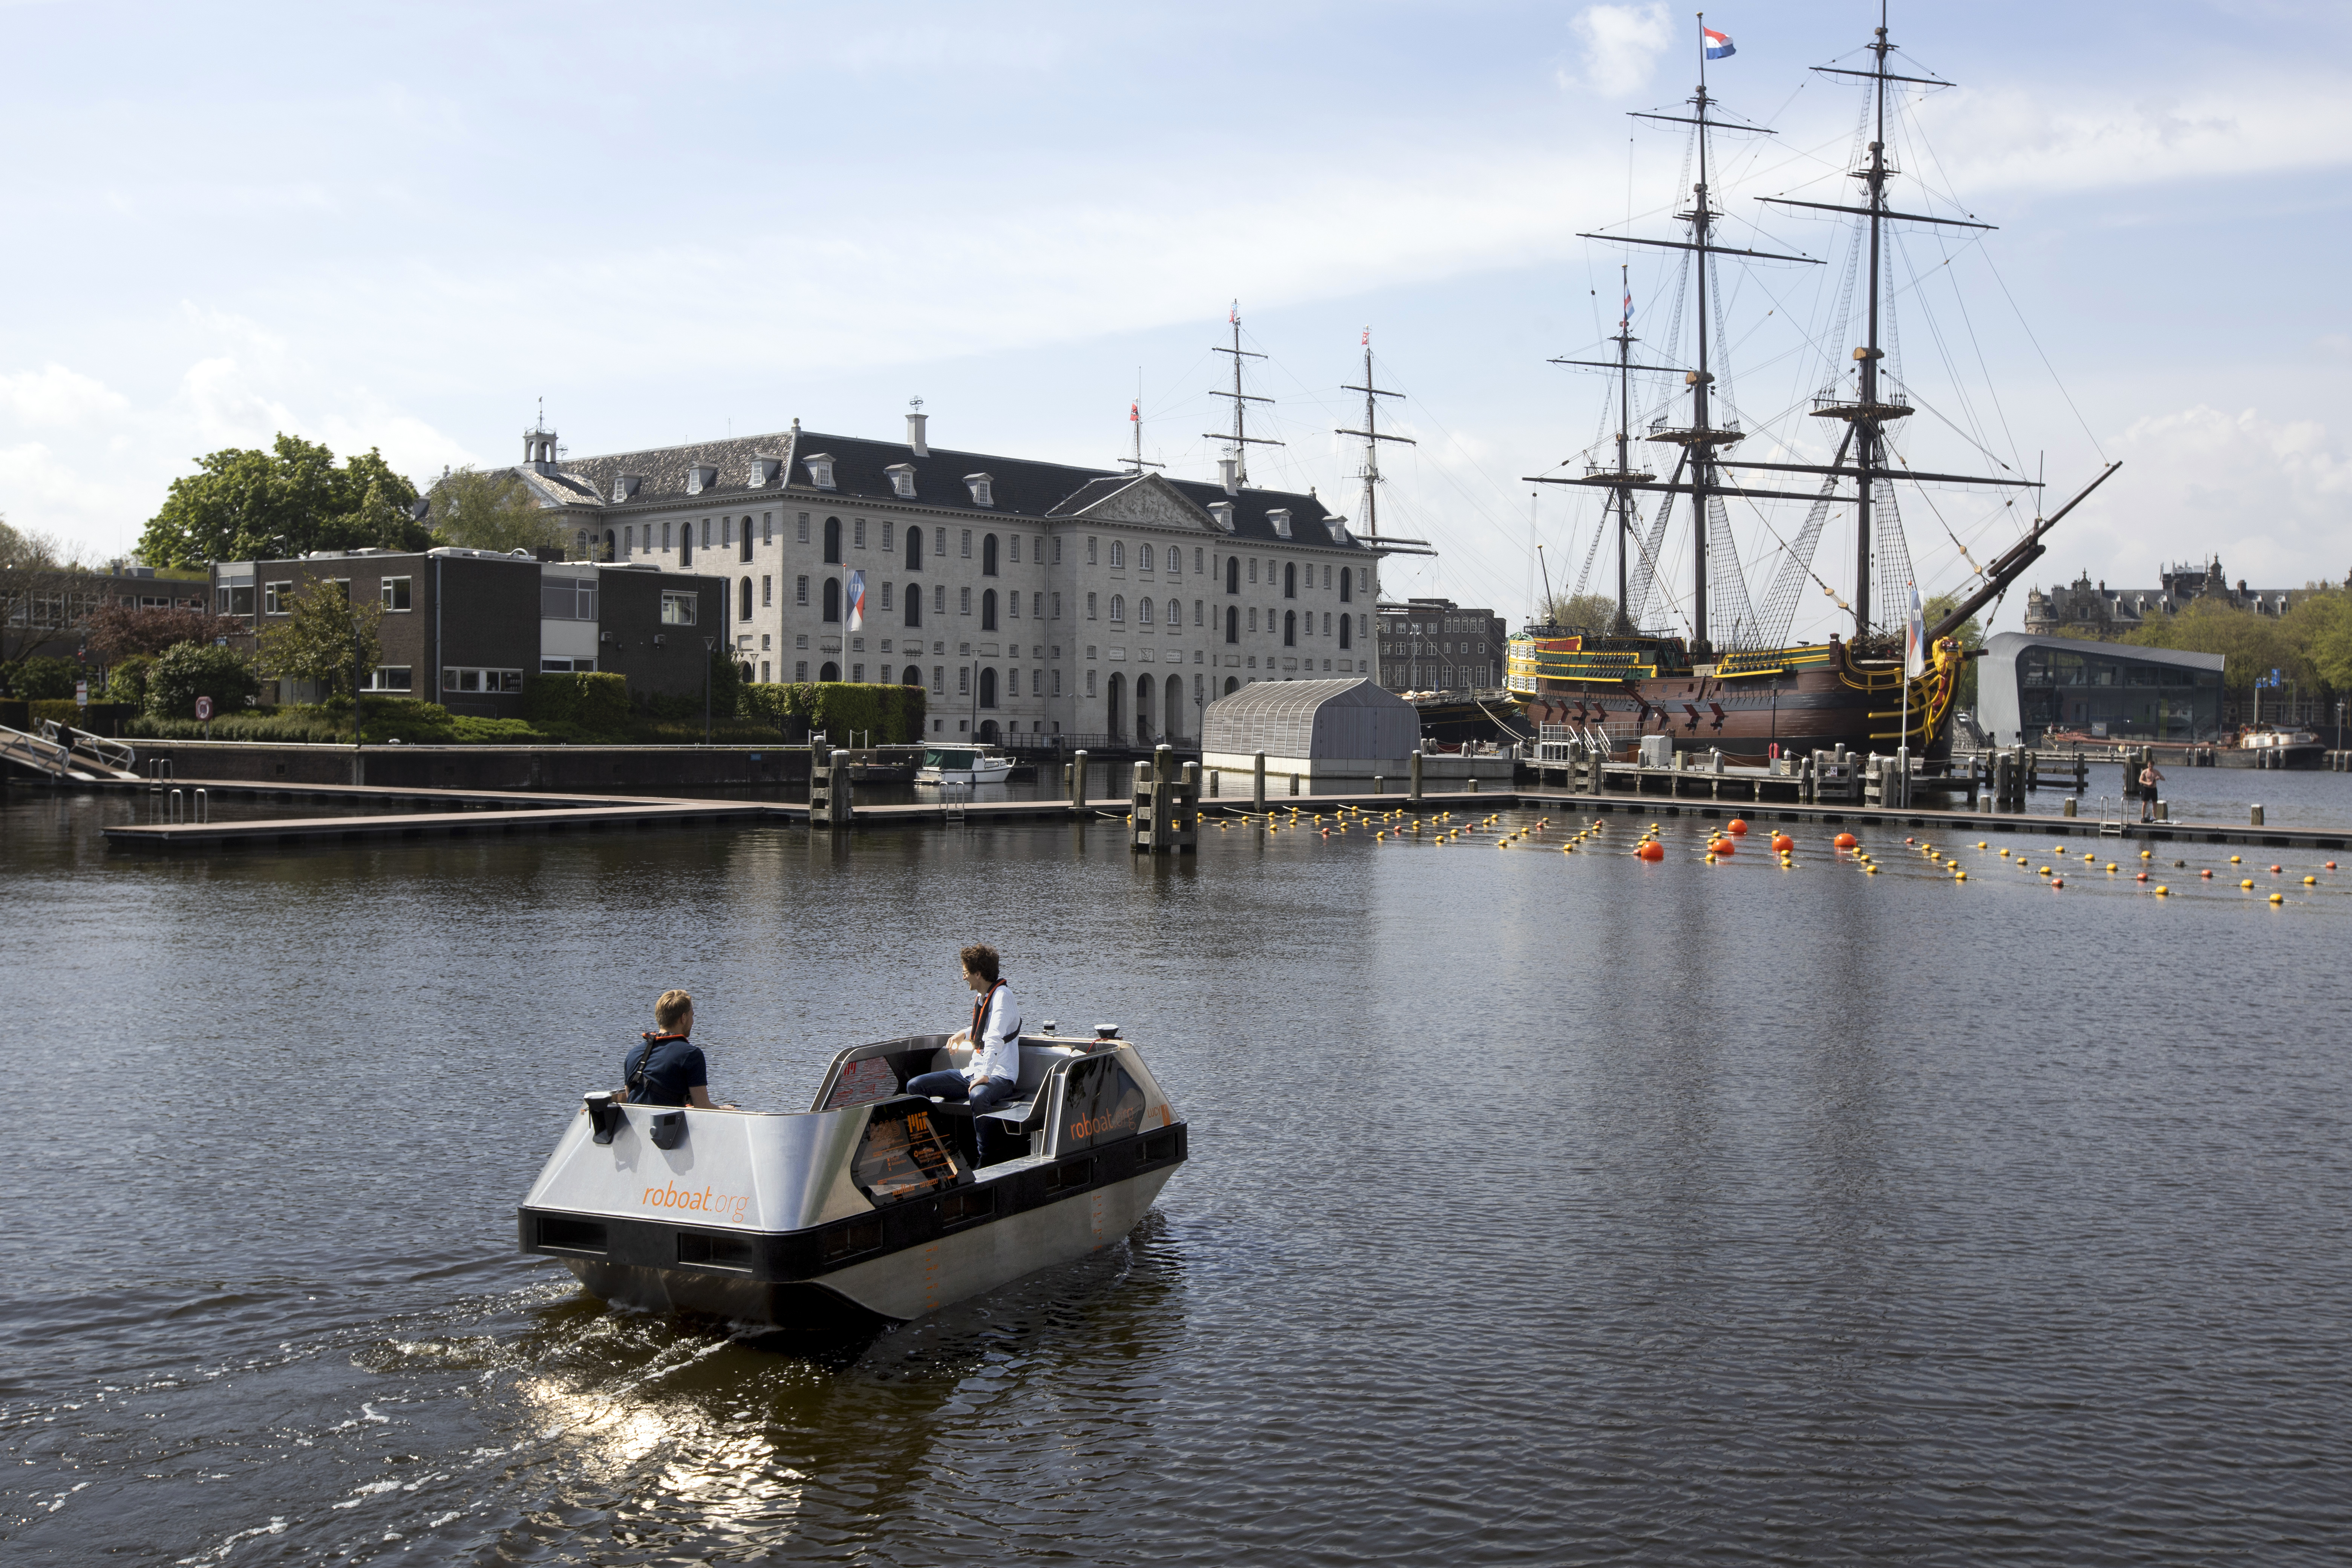 Amsterdam Tests Out Electric Autonomous Boats on Its Canals